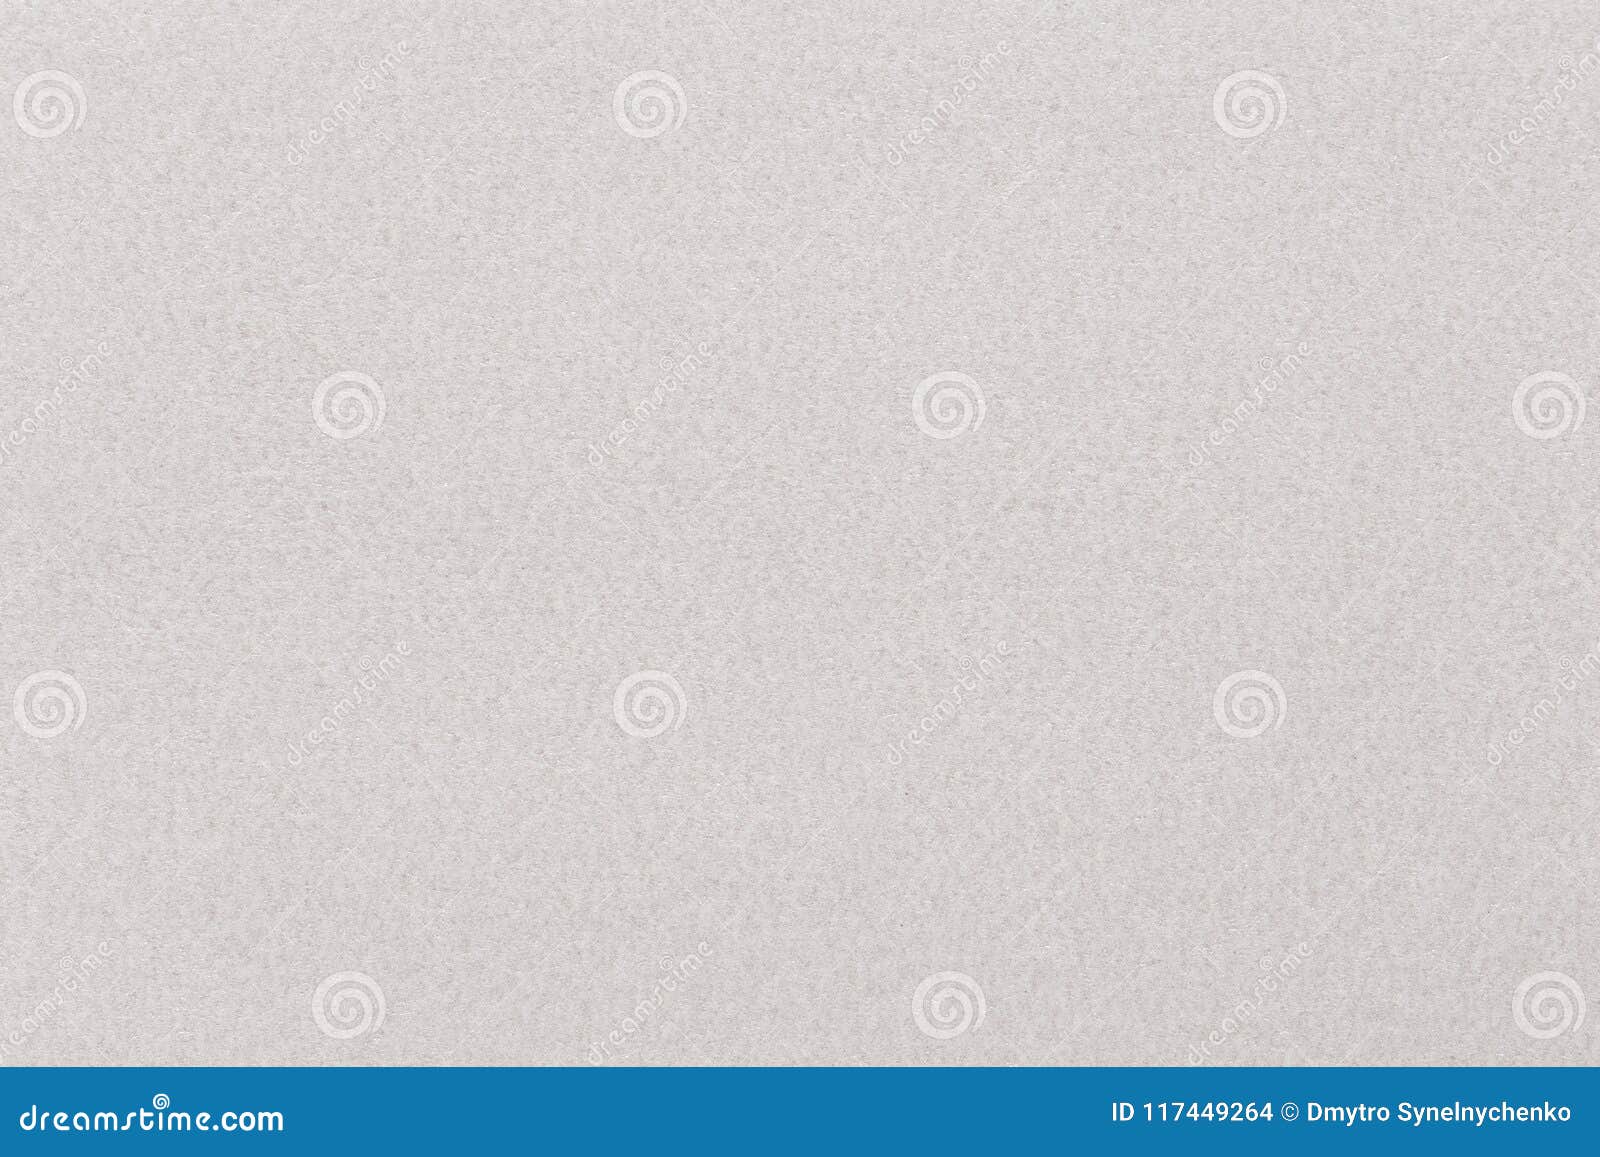 Ivory Off White Paper Texture Photos Free & Royalty-Free Stock Photos from Dreamstime